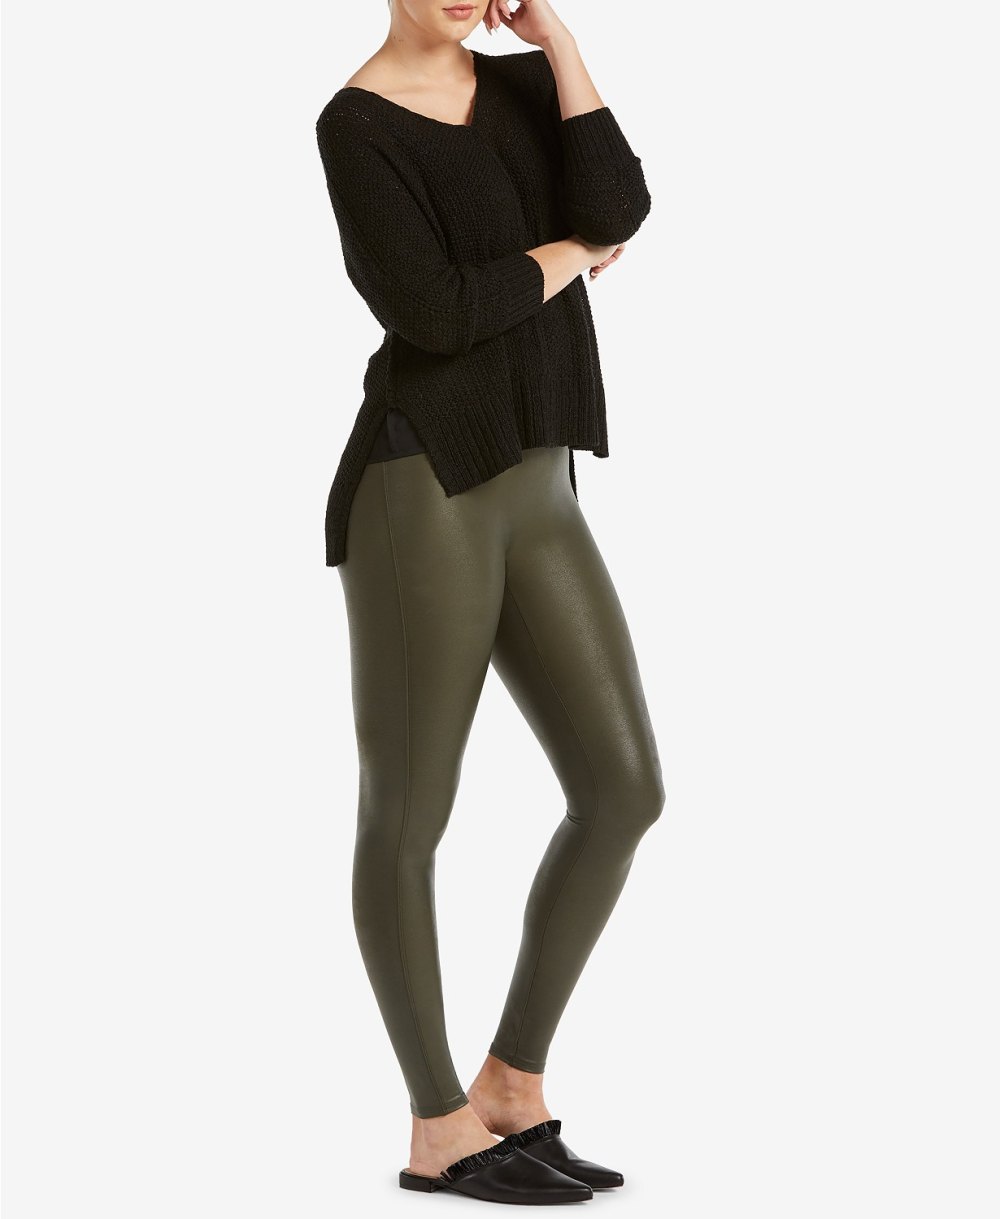 Spanx Faux Leather Leggings Everyone Is Obsessed With Are on Sale